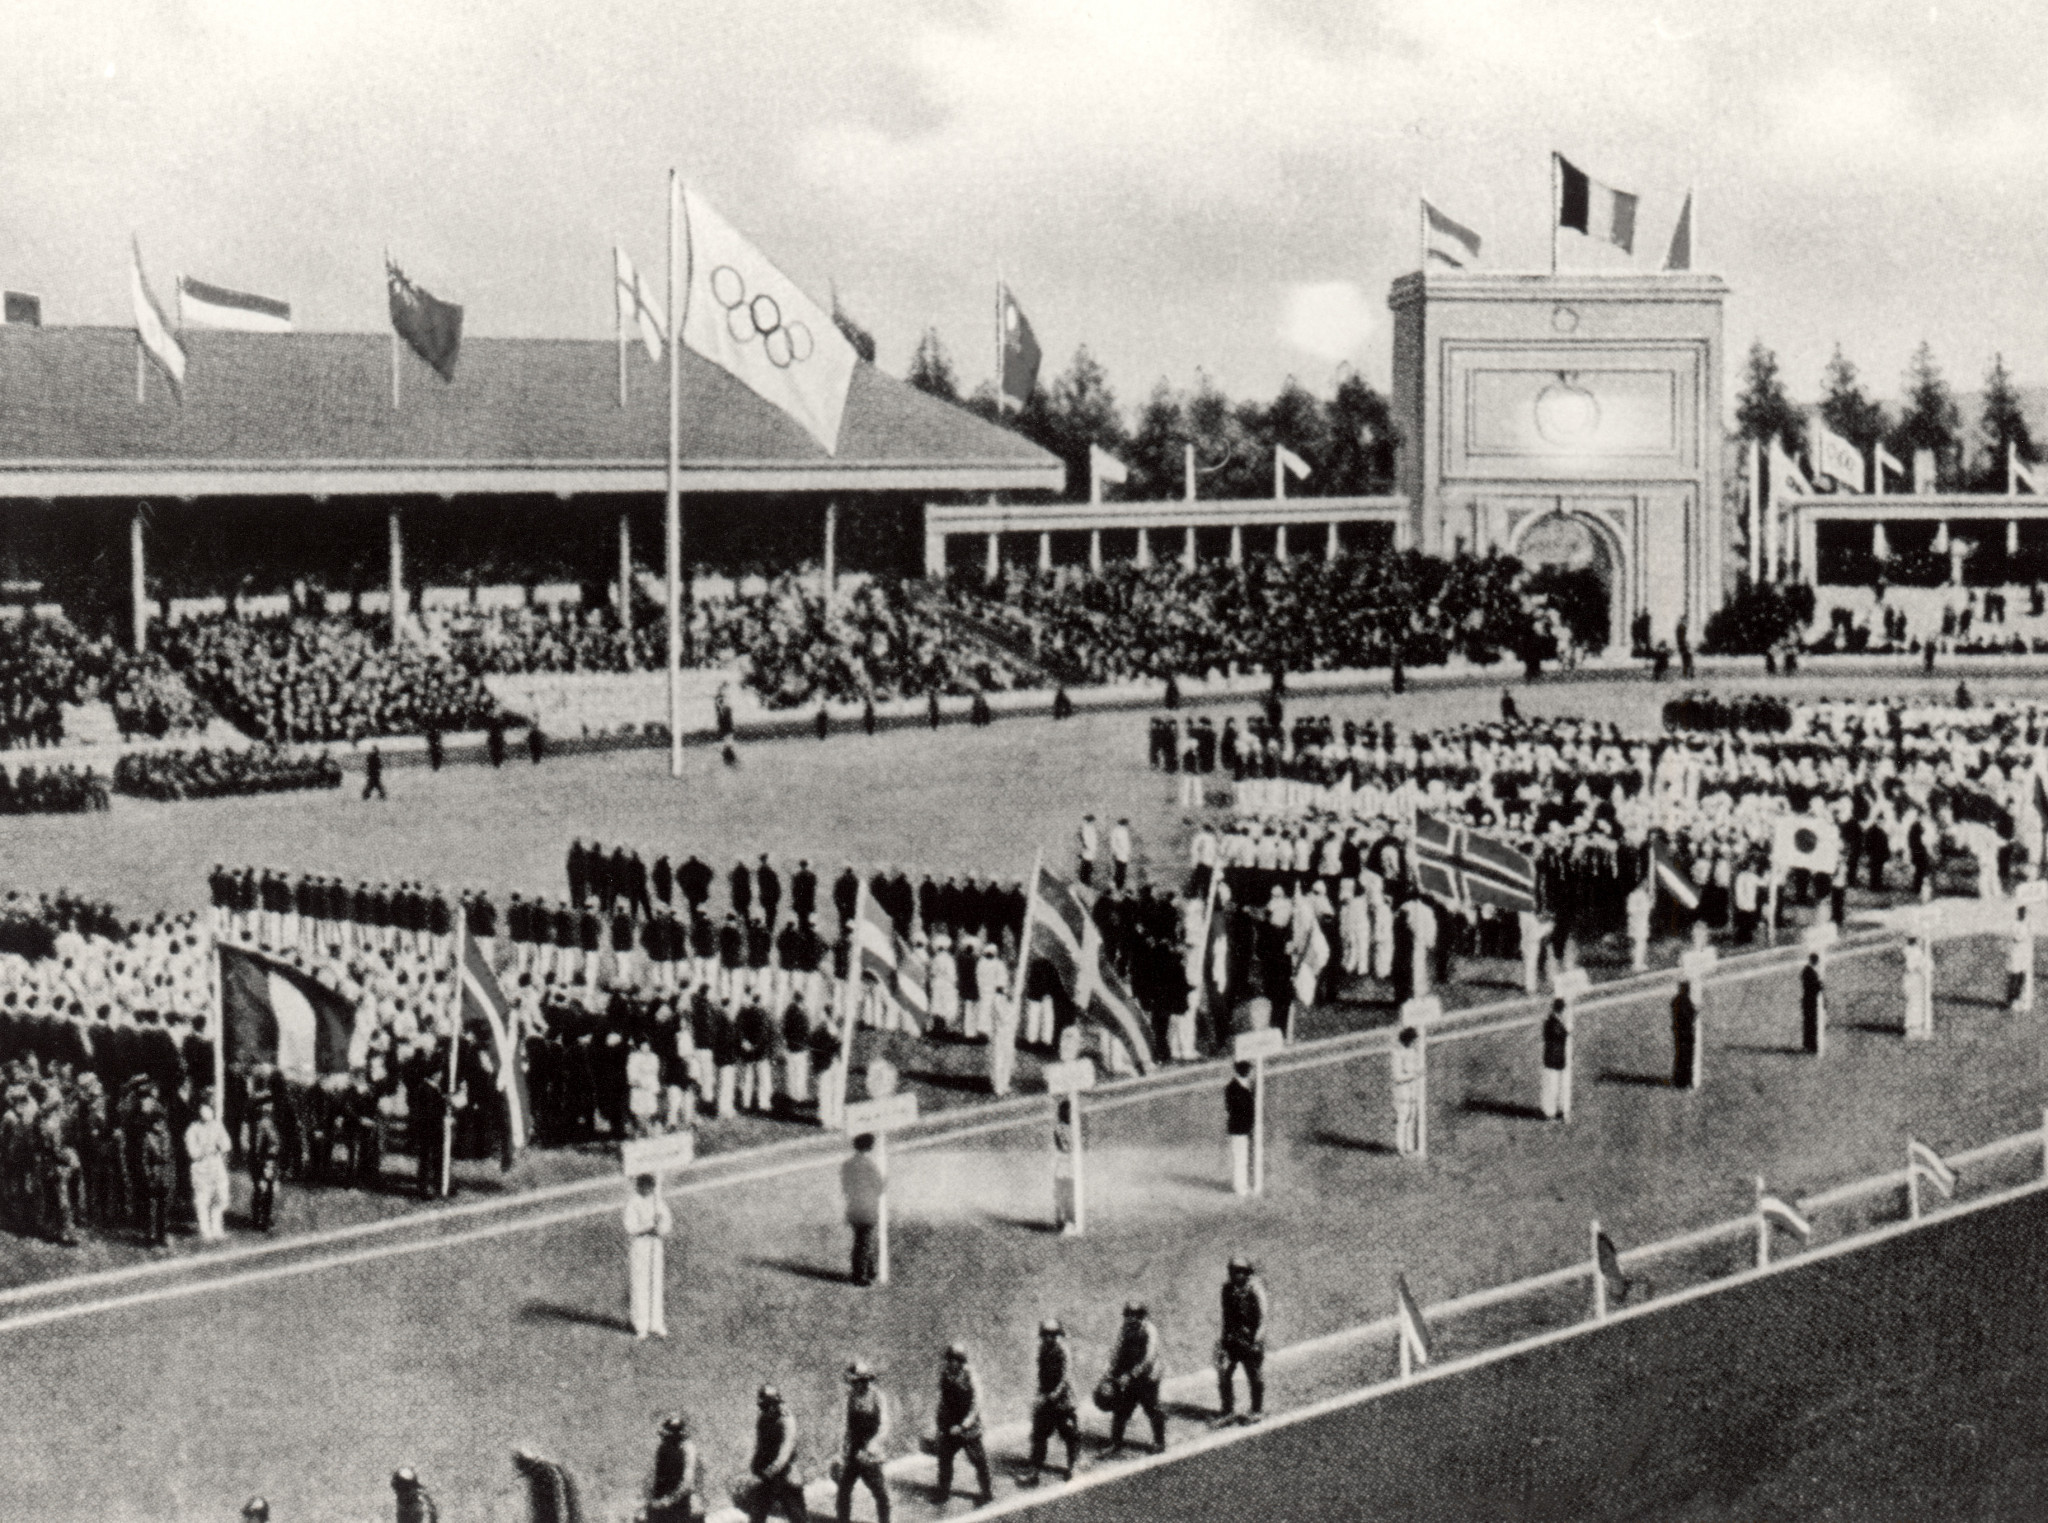 The Opening Ceremony of the Antwerp 1920 Games with the Olympic Rings featured for the first time ©Getty Images